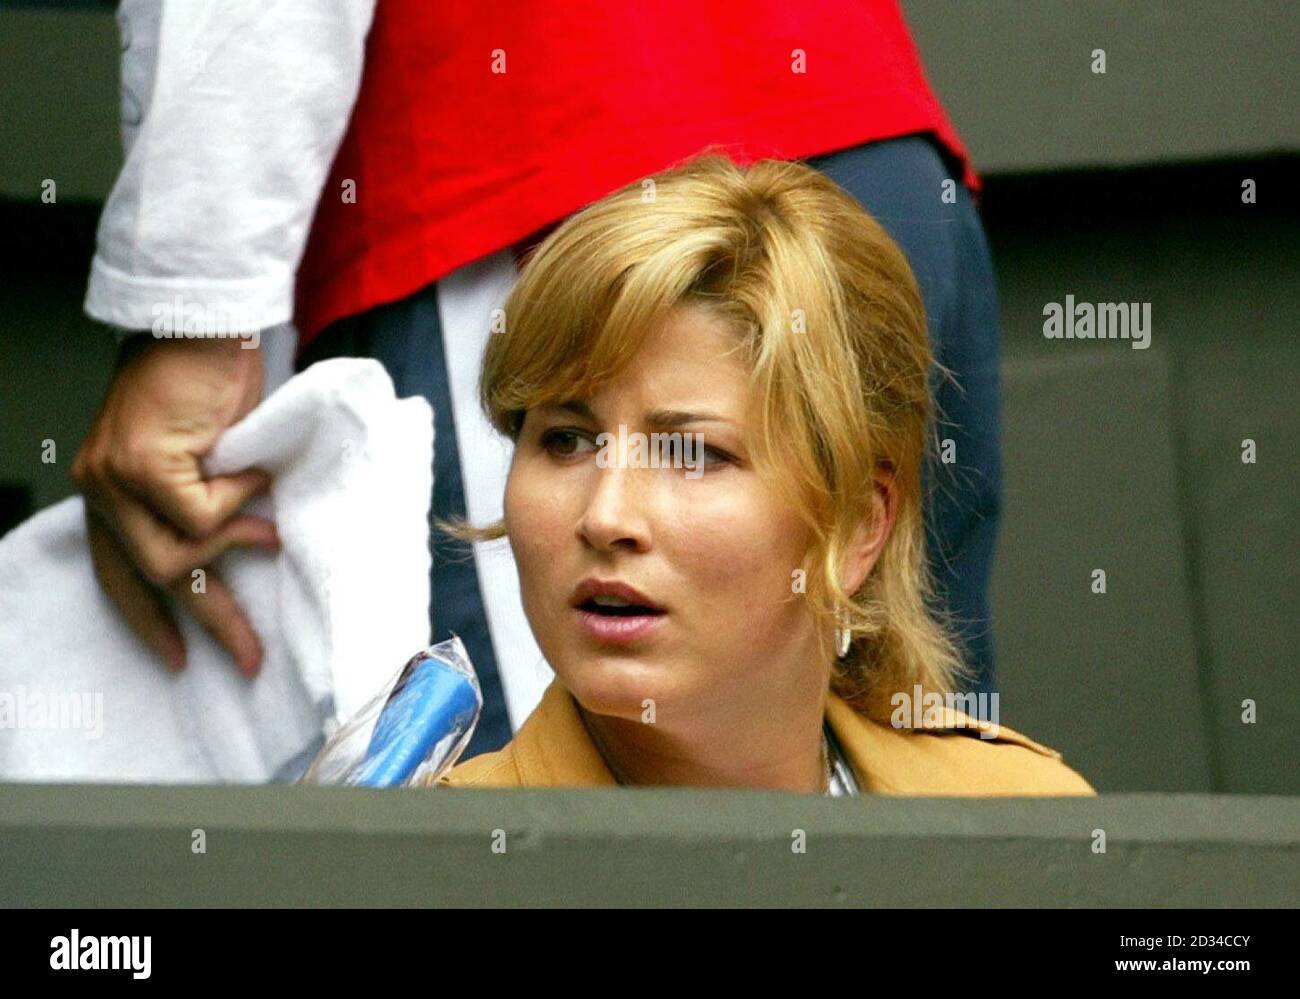 Mirka Vavrinec, girlfriend of Switzerland's Roger Federer watches him in action against Germany's Nicolas Kiefer. Stock Photo